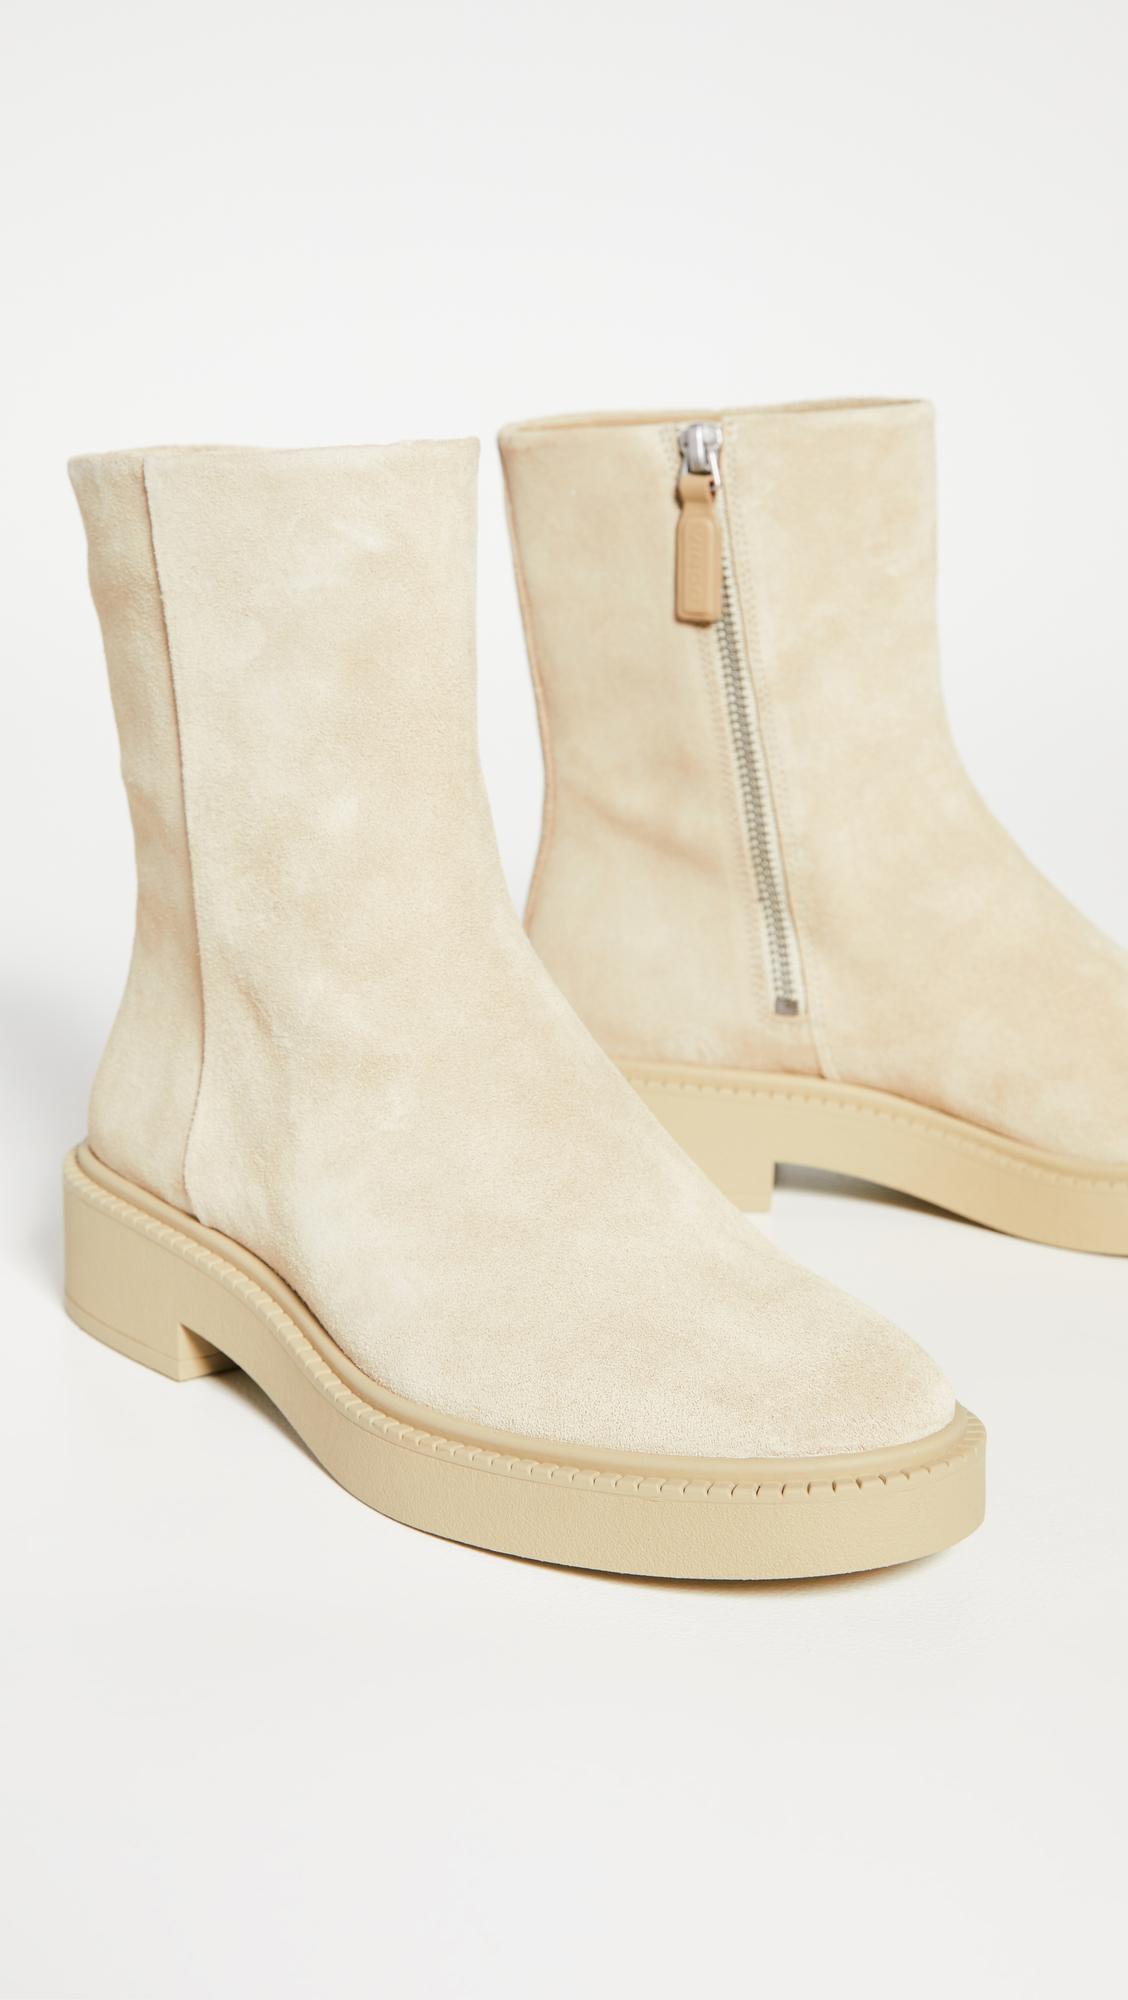 InneVince Kady Suede Low Boot